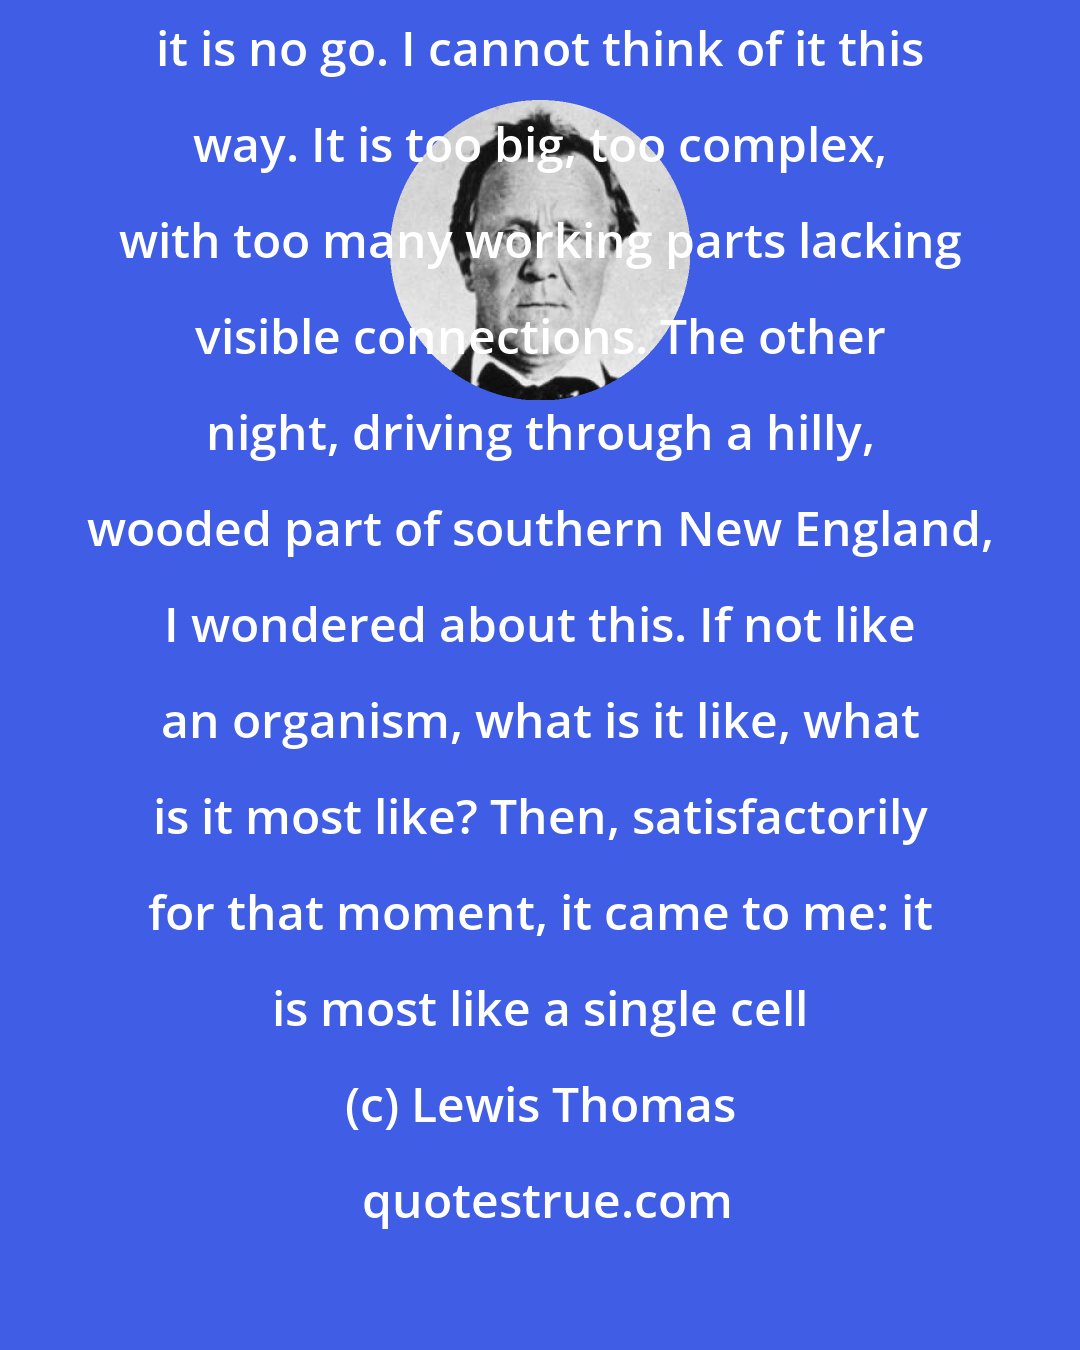 Lewis Thomas: I have been trying to think of the earth as a kind of organism, but it is no go. I cannot think of it this way. It is too big, too complex, with too many working parts lacking visible connections. The other night, driving through a hilly, wooded part of southern New England, I wondered about this. If not like an organism, what is it like, what is it most like? Then, satisfactorily for that moment, it came to me: it is most like a single cell